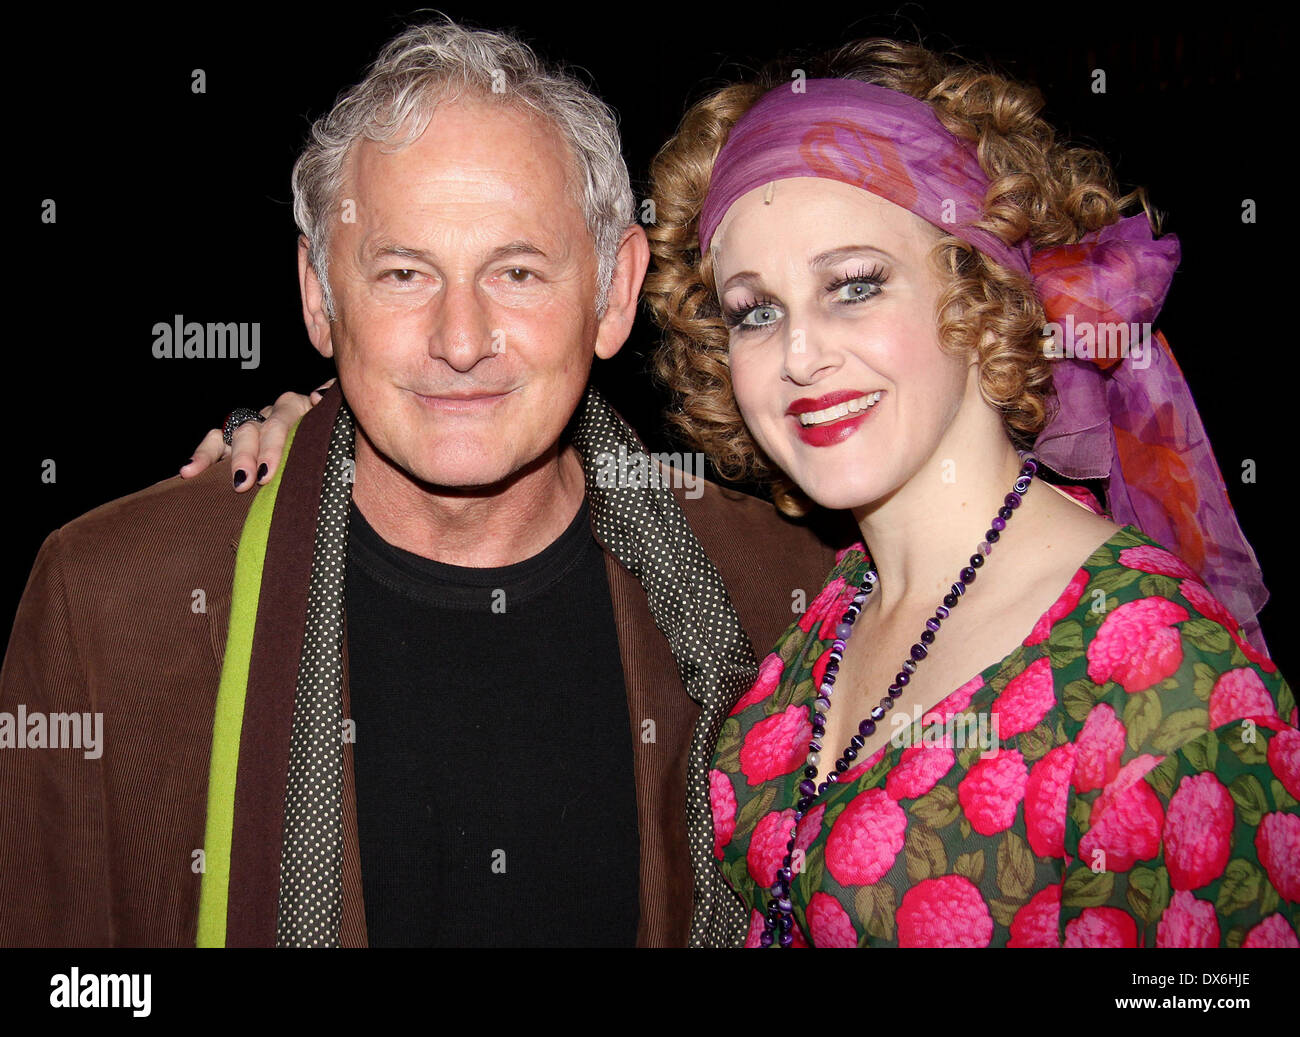 Victor Garber Stock Photos & Victor Garber Stock Images - Alamy1300 x 1037